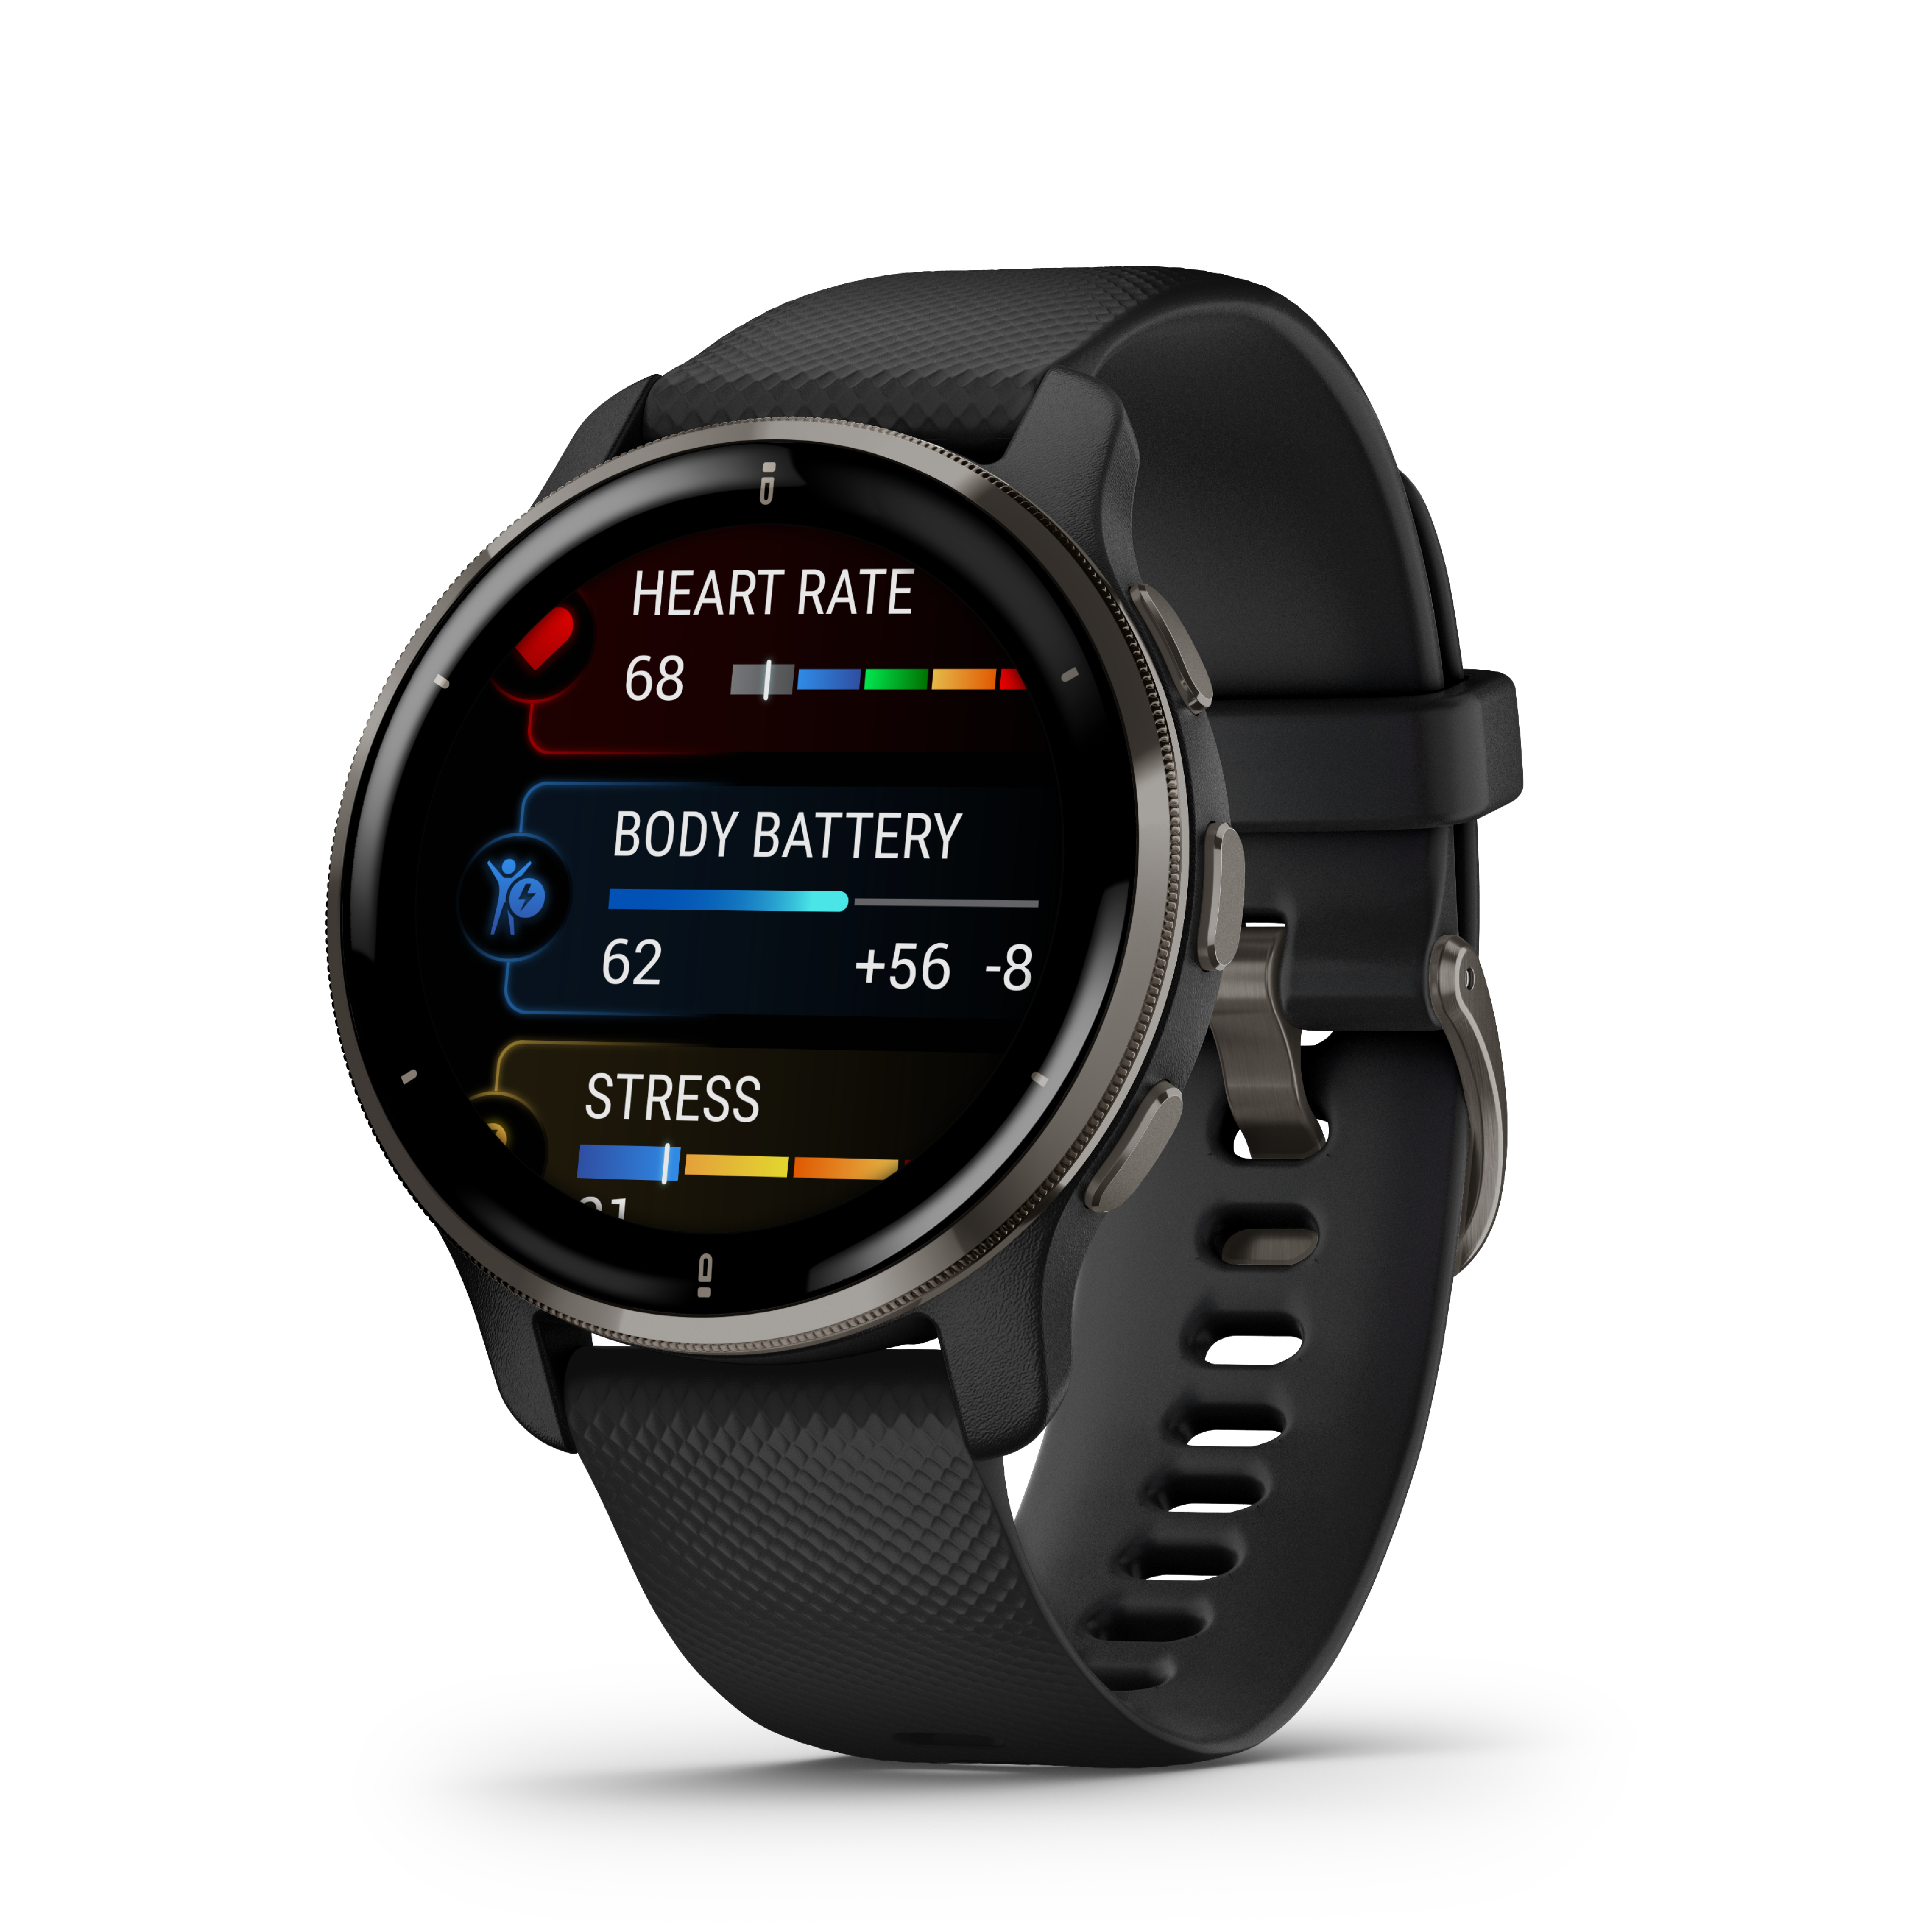 Tackle outdoor challenges easily with these newly launched Garmin smartwatches 2022 3